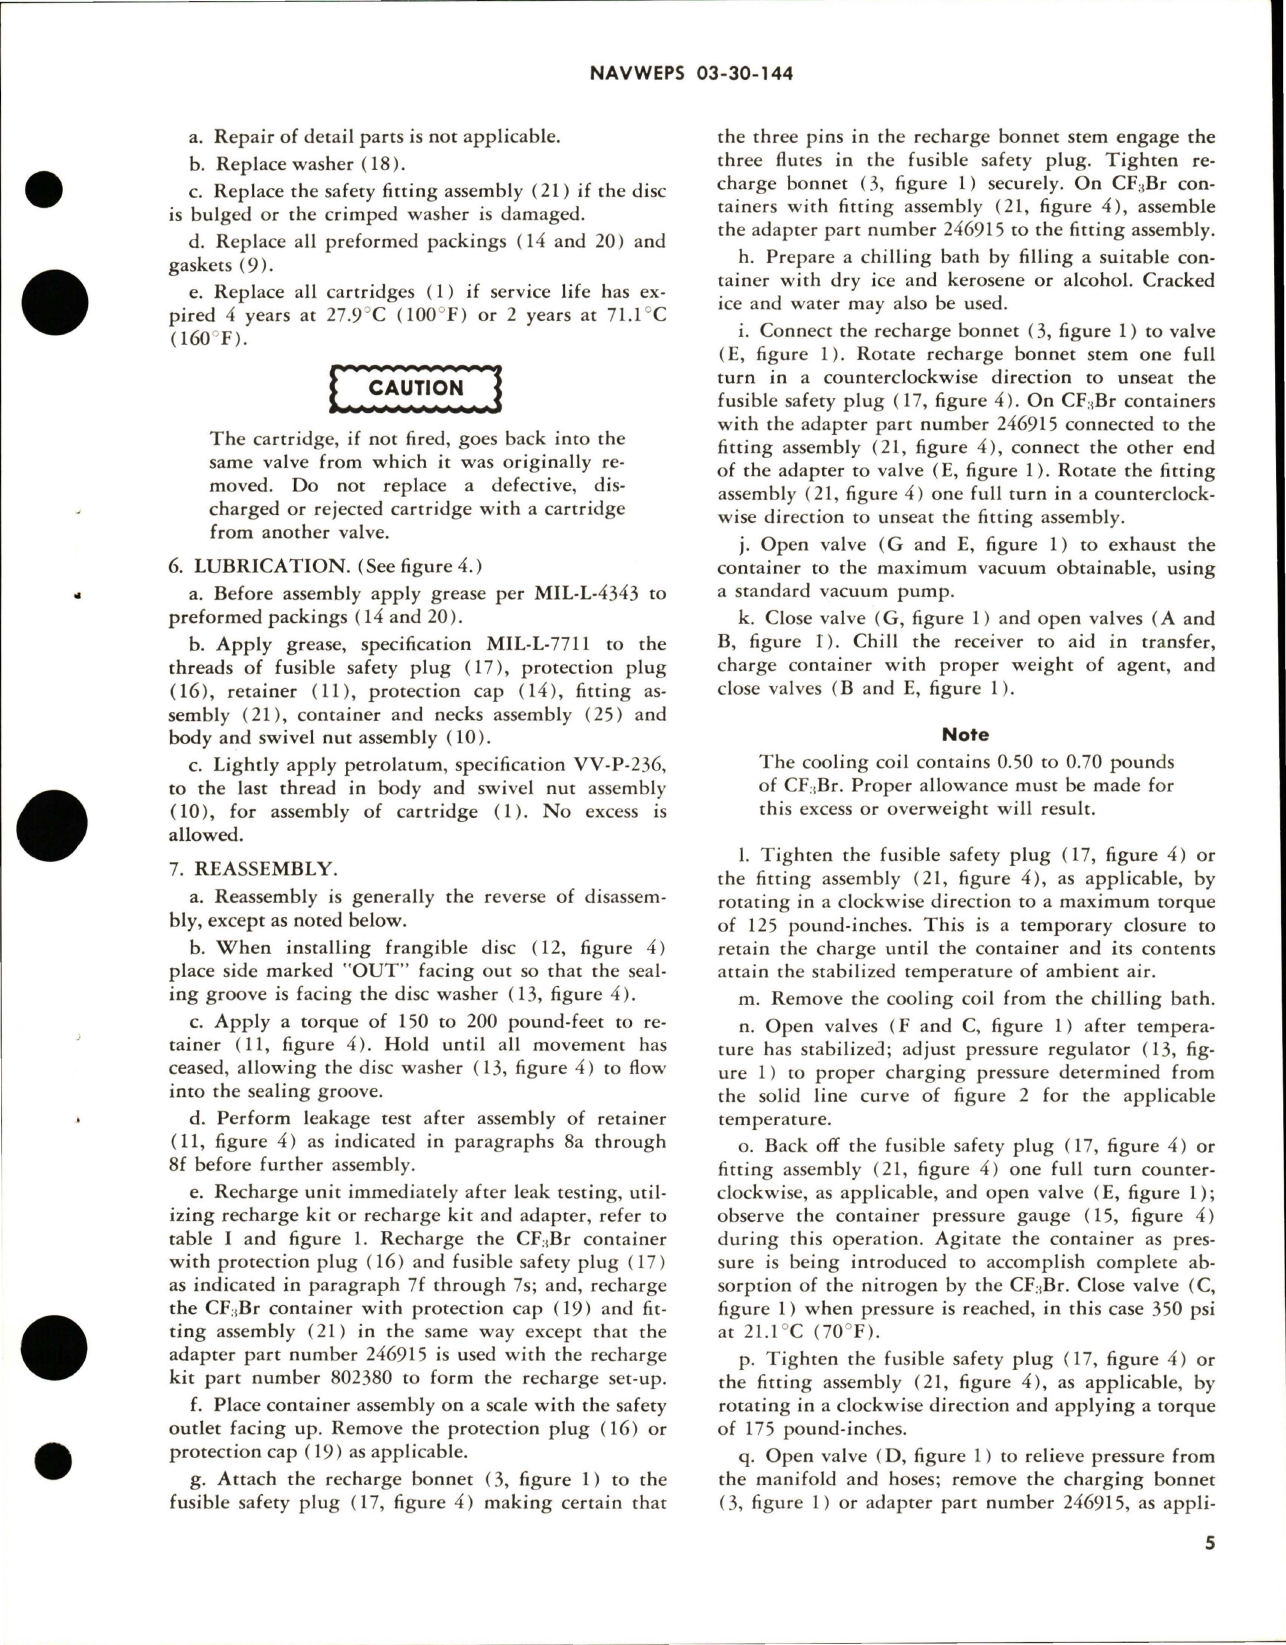 Sample page 5 from AirCorps Library document: Overhaul Instructions with Parts Breakdown for CF3BR Container, Valve and Cartridge Assembly - 891134, 891134-01, and 891134-02